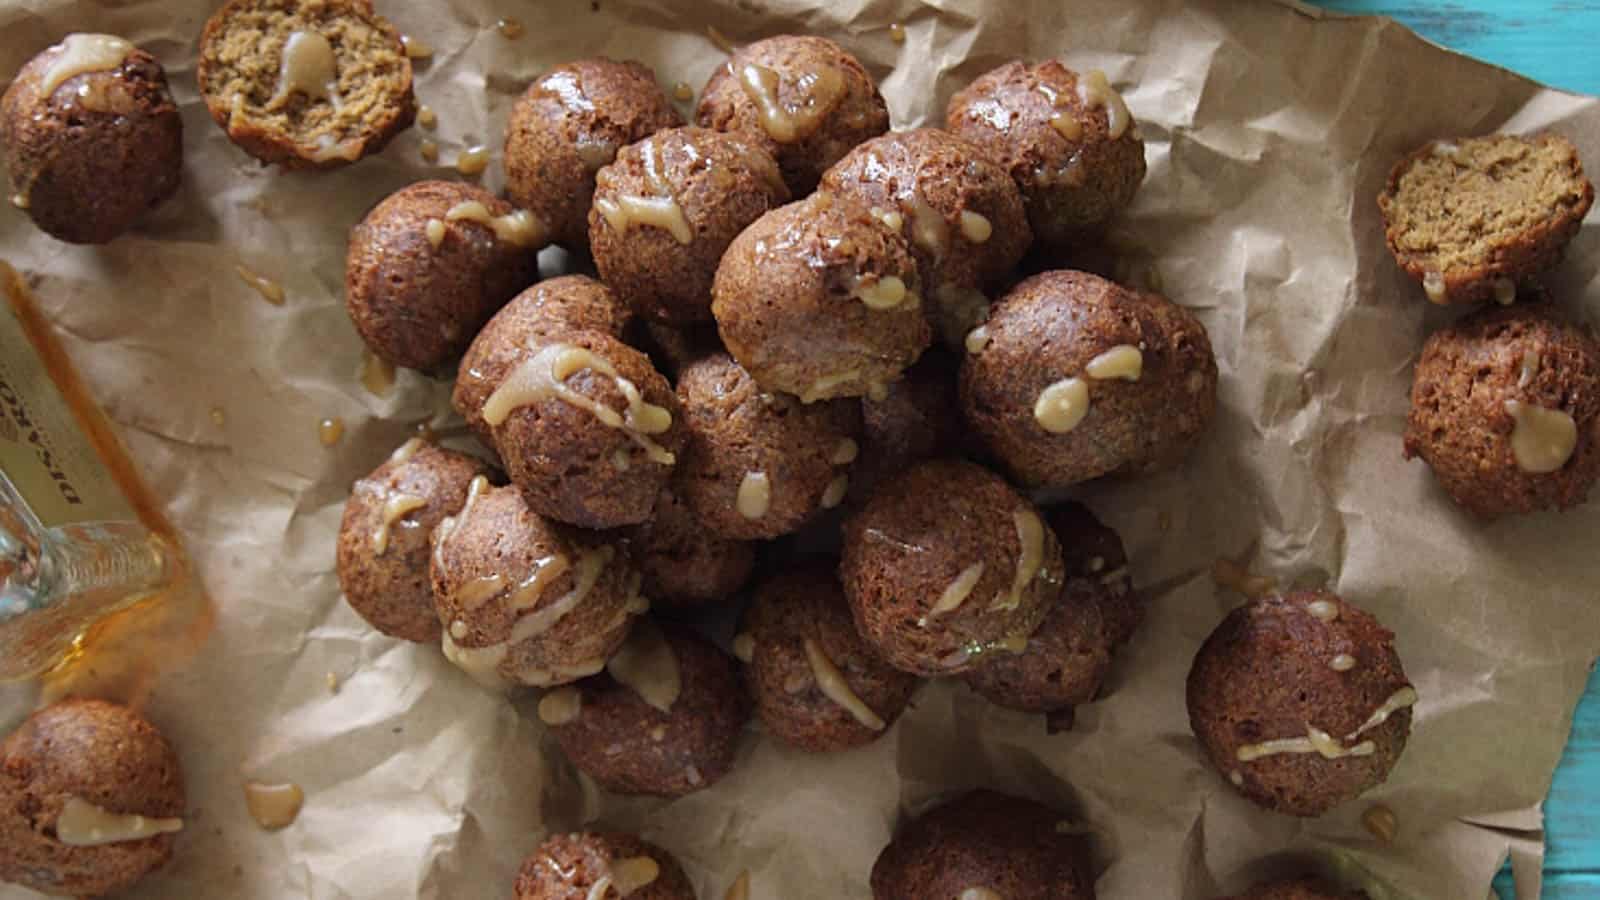 Chocolate pumpkin donut holes on crumbled brown paper drizzled with amaretto glaze.